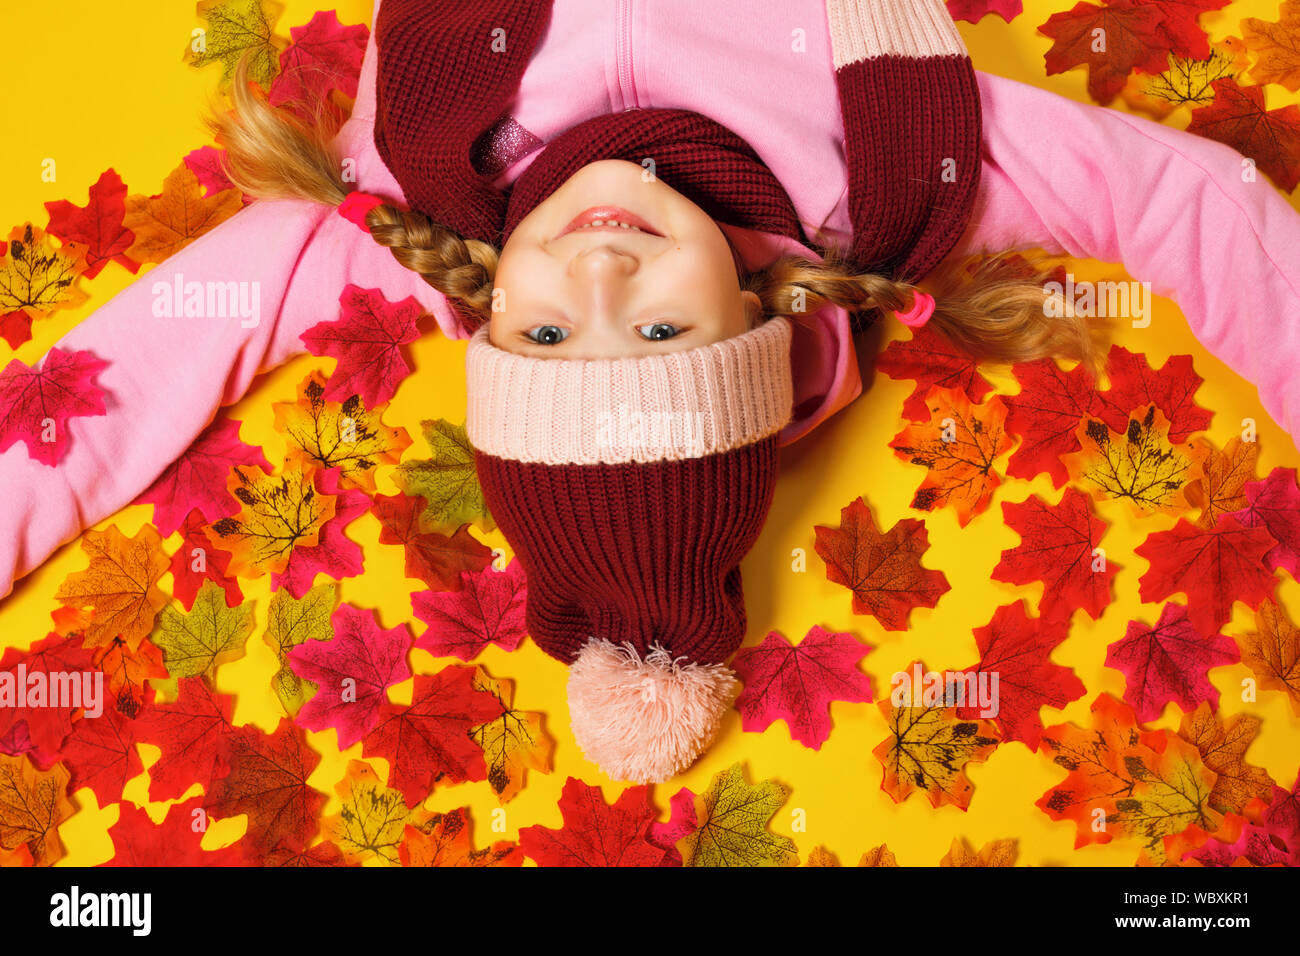 Top view of a happy little girl lying on autumn leaves. The child is upside down in a scarf and hat. Stock Photo